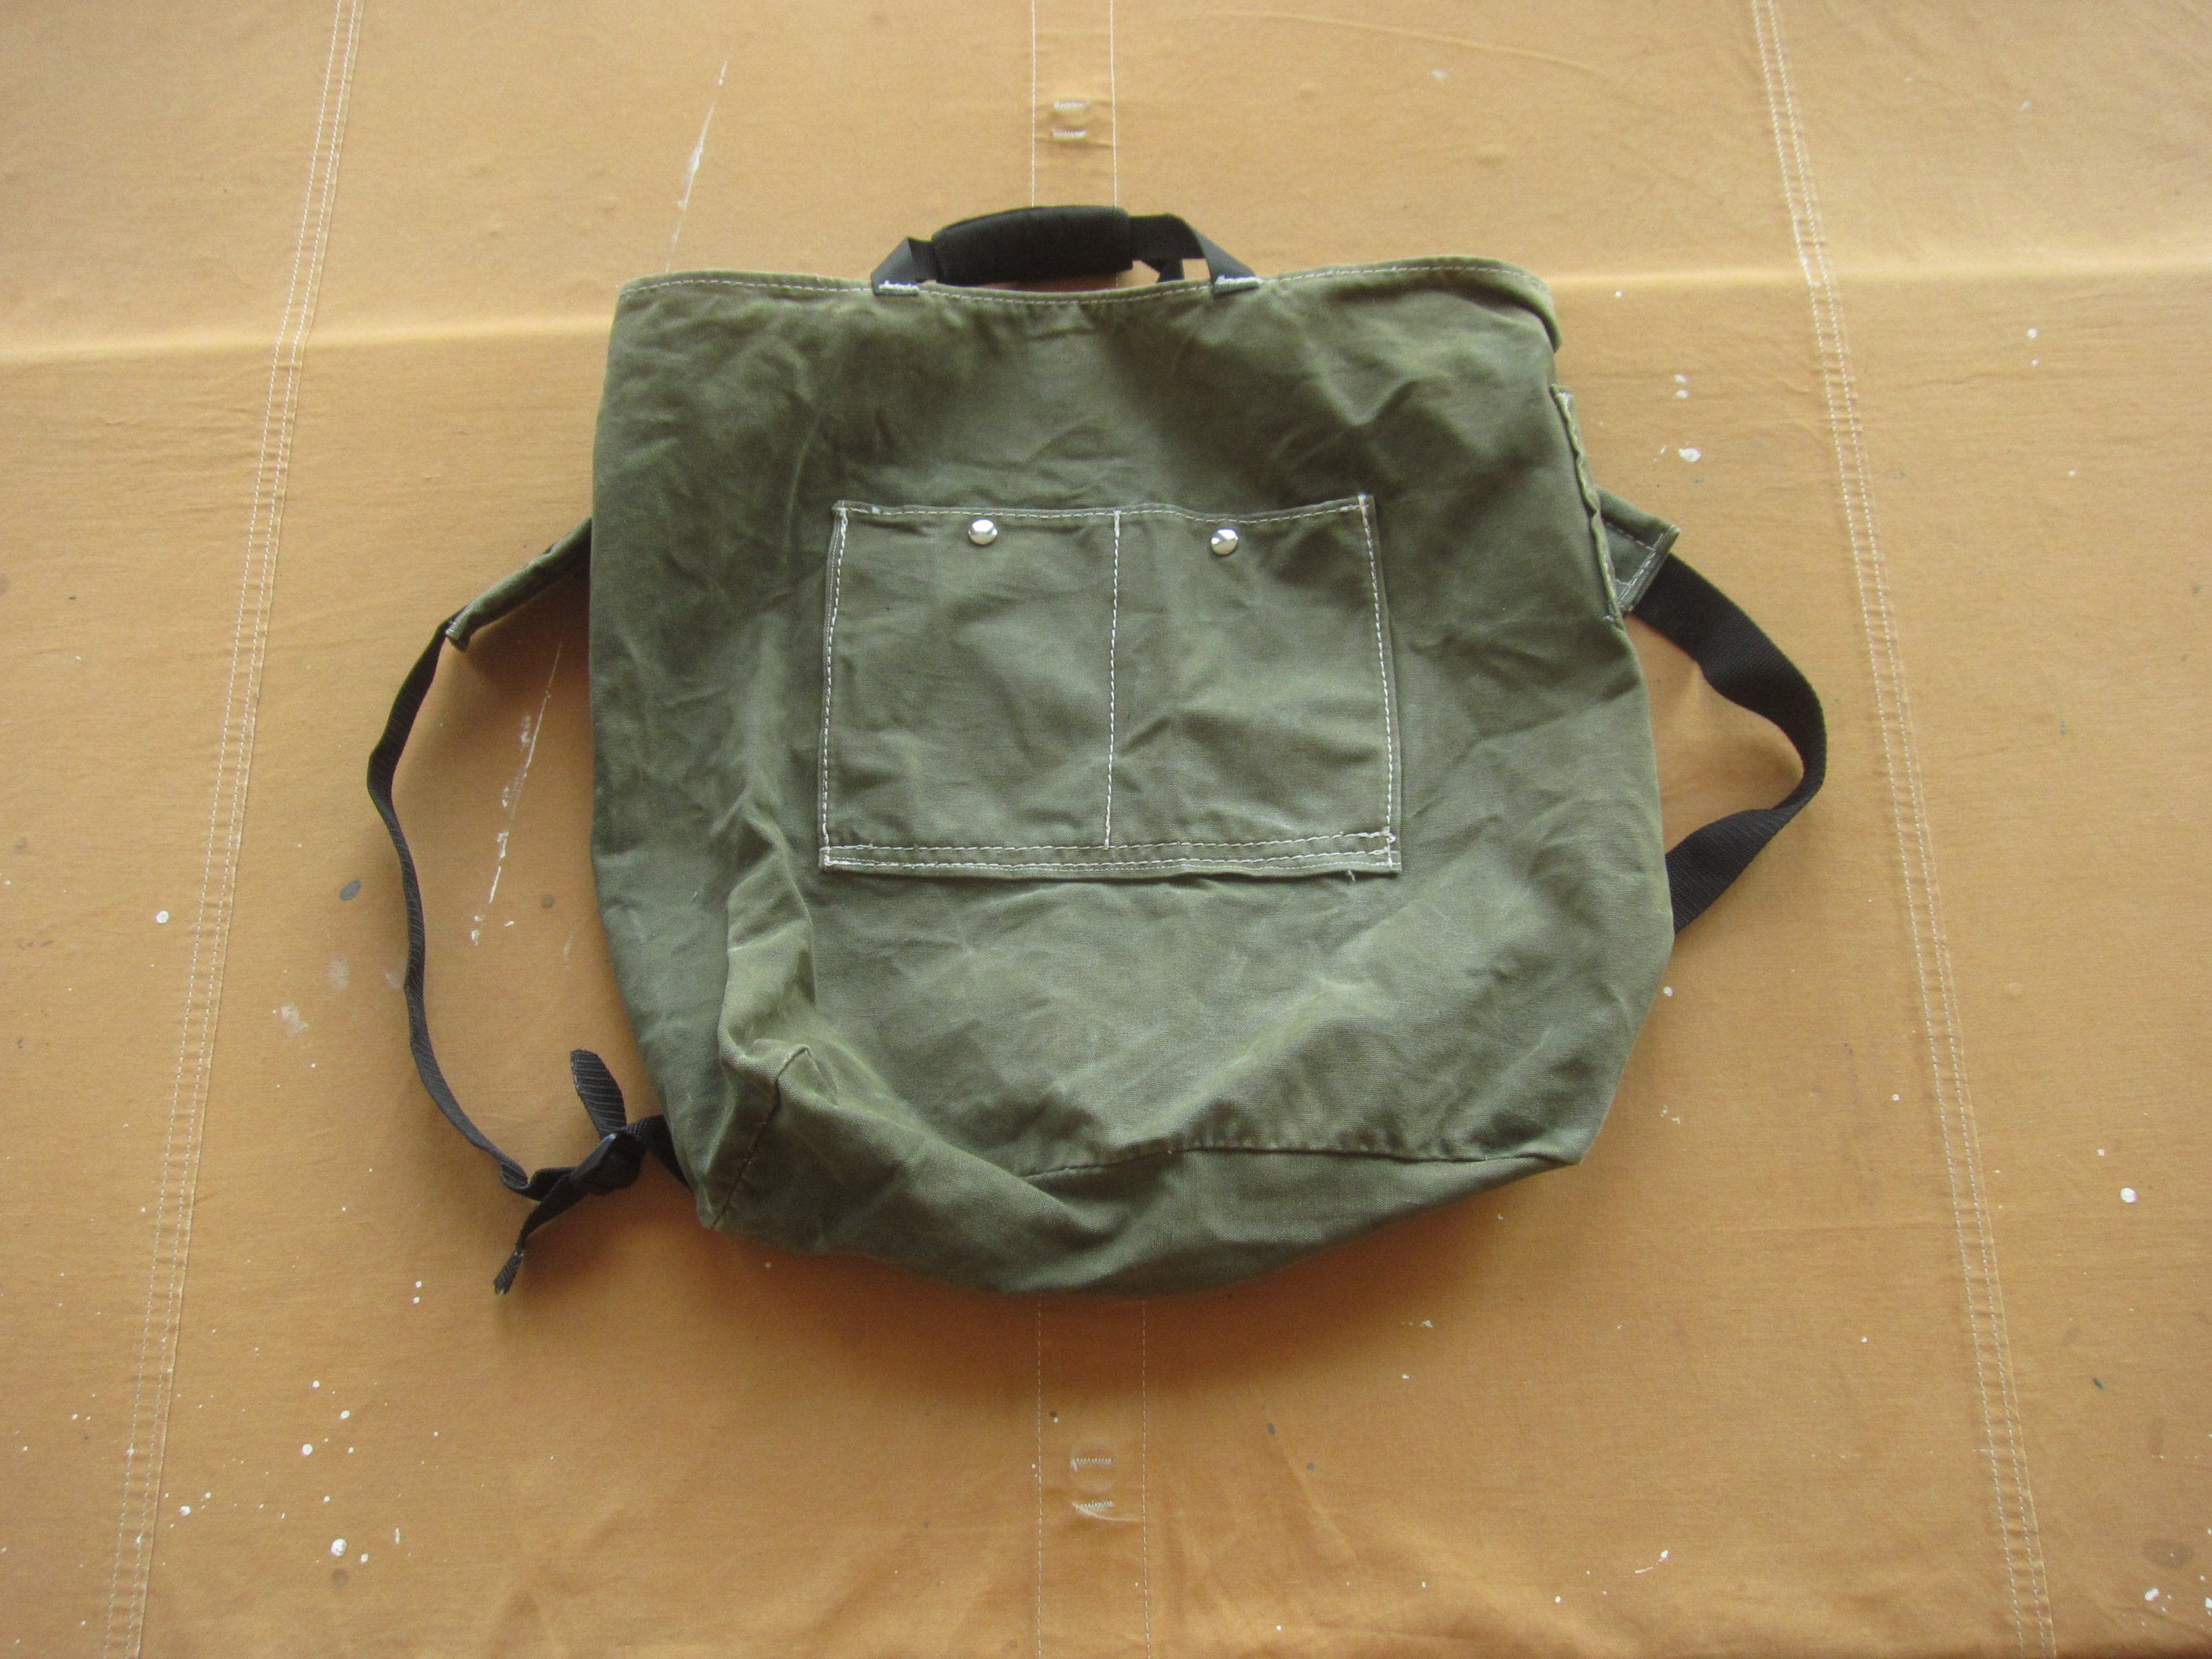 Huge Vintage Green Canvas Pack Duluth?, Military?, Antique? Canoe Pack  Hunting